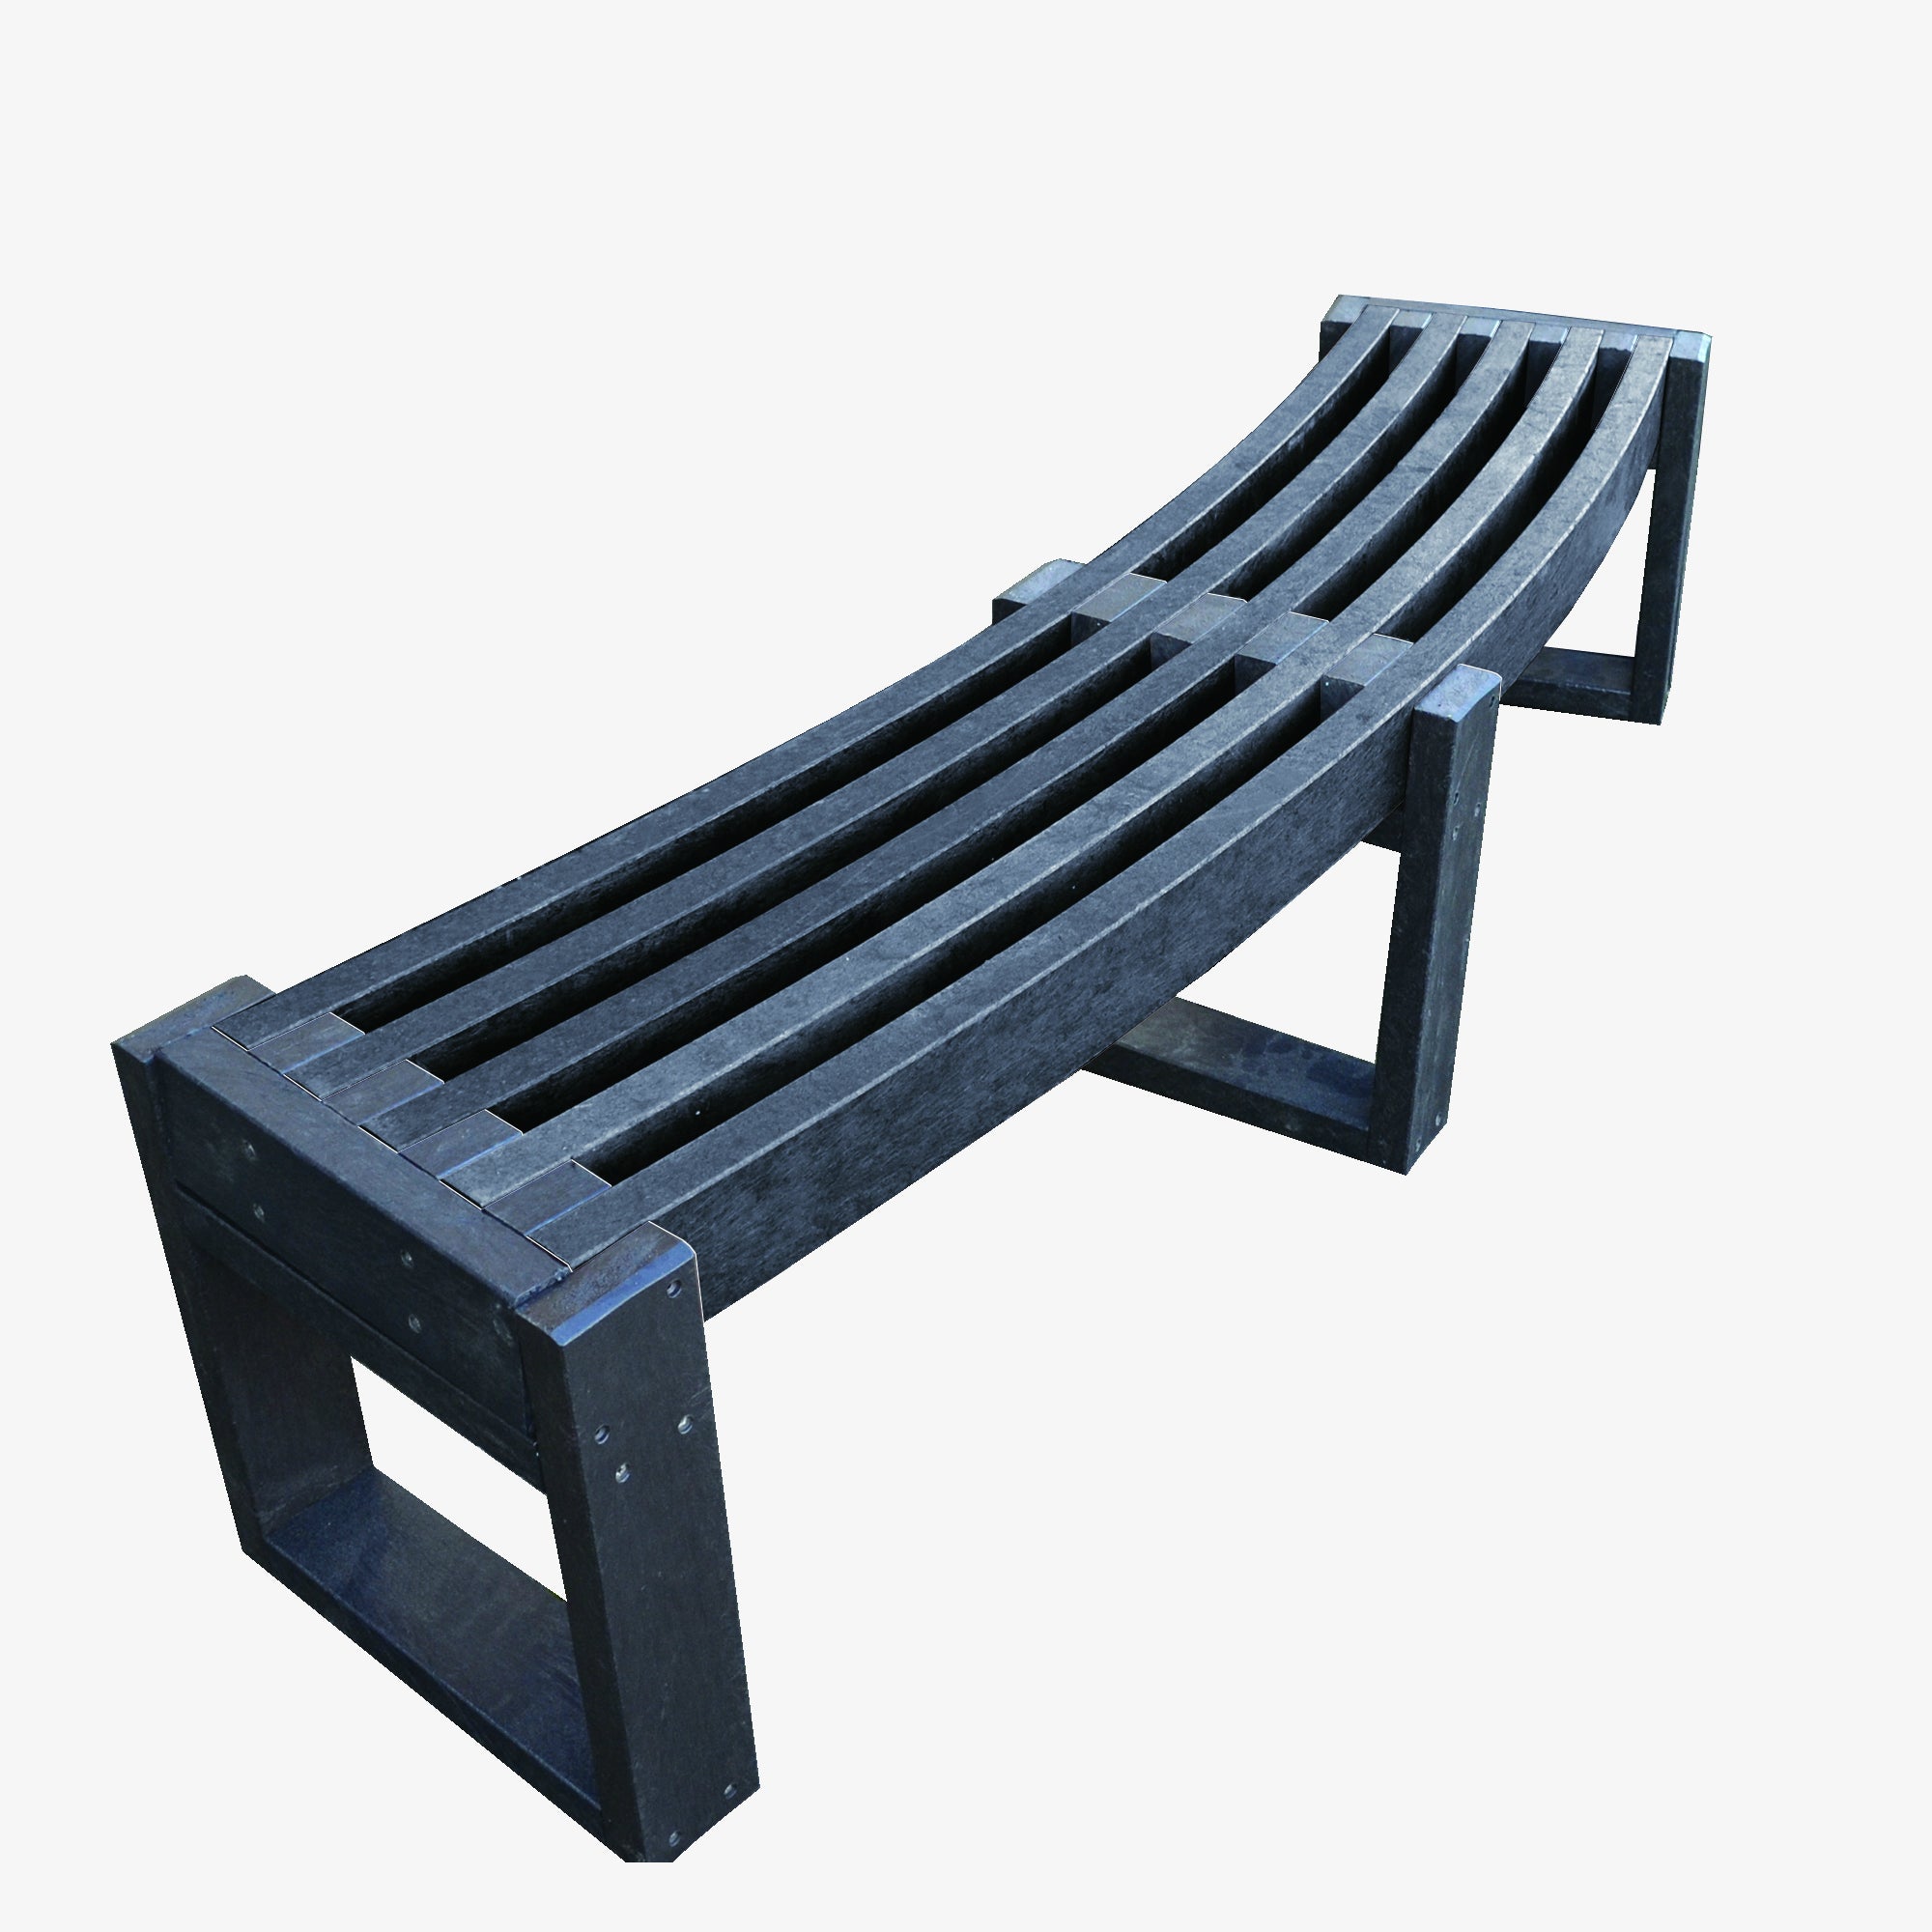 Manticore Lumber curved black recycled plastic bench